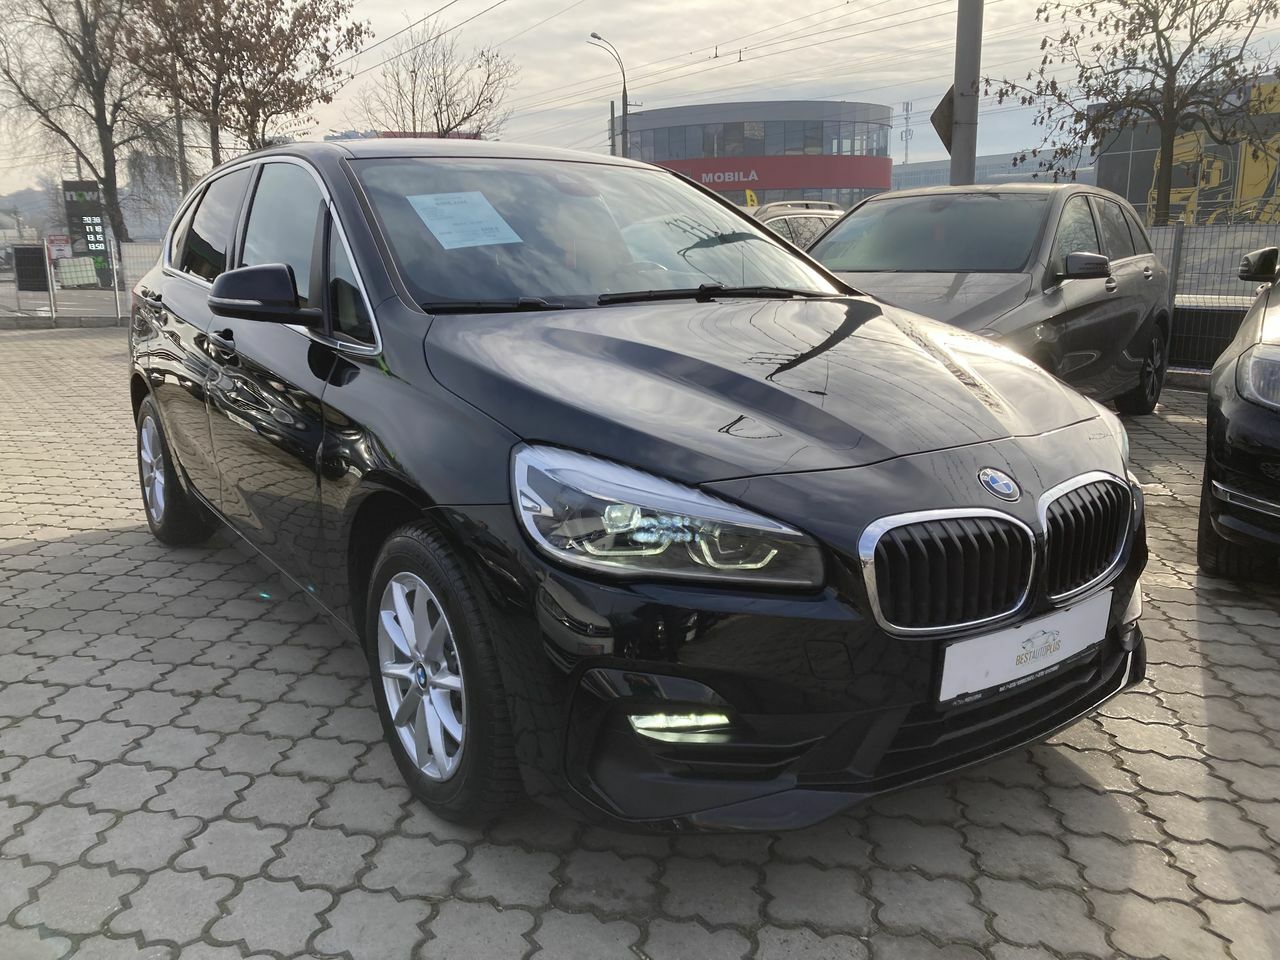 <span style="font-weight: 700;">bmw 2 series&nbsp;</span>